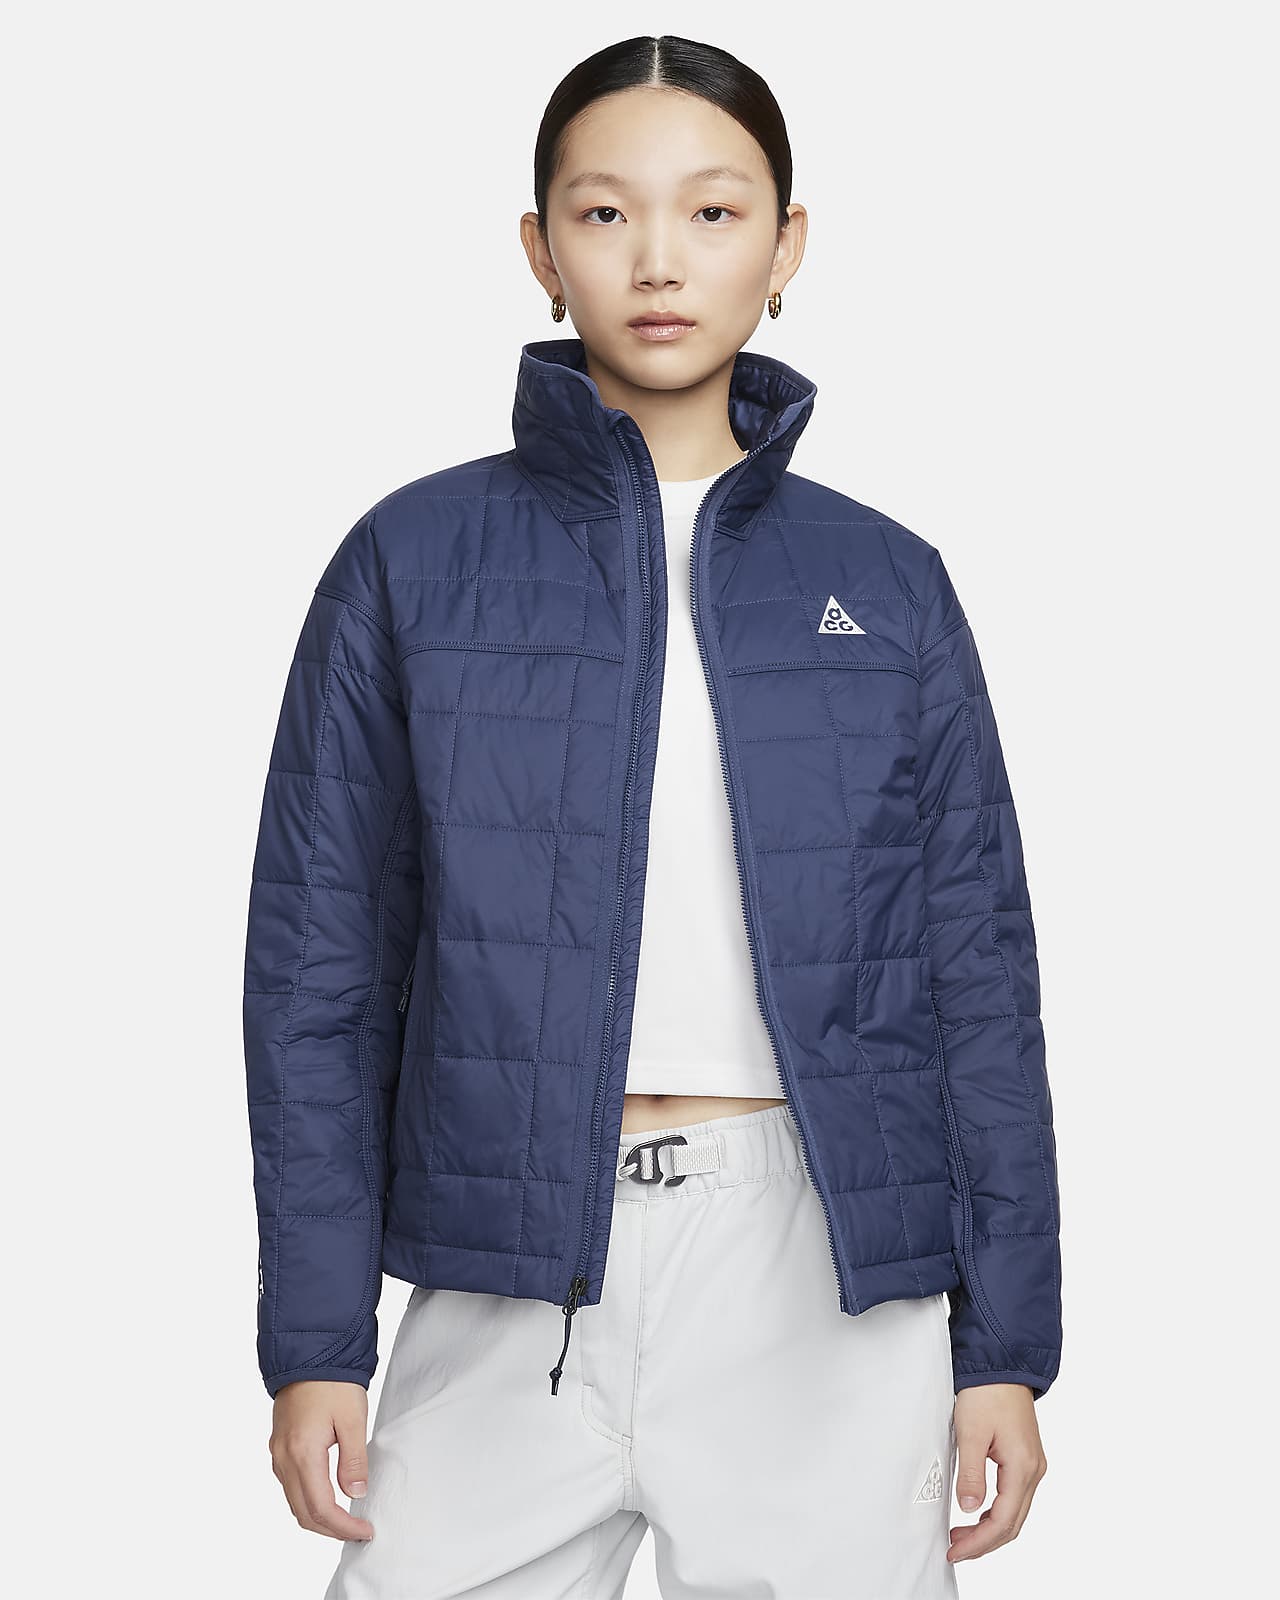 Nike ACG "Rope de Dope" Women's Therma-FIT ADV Quilted Jacket